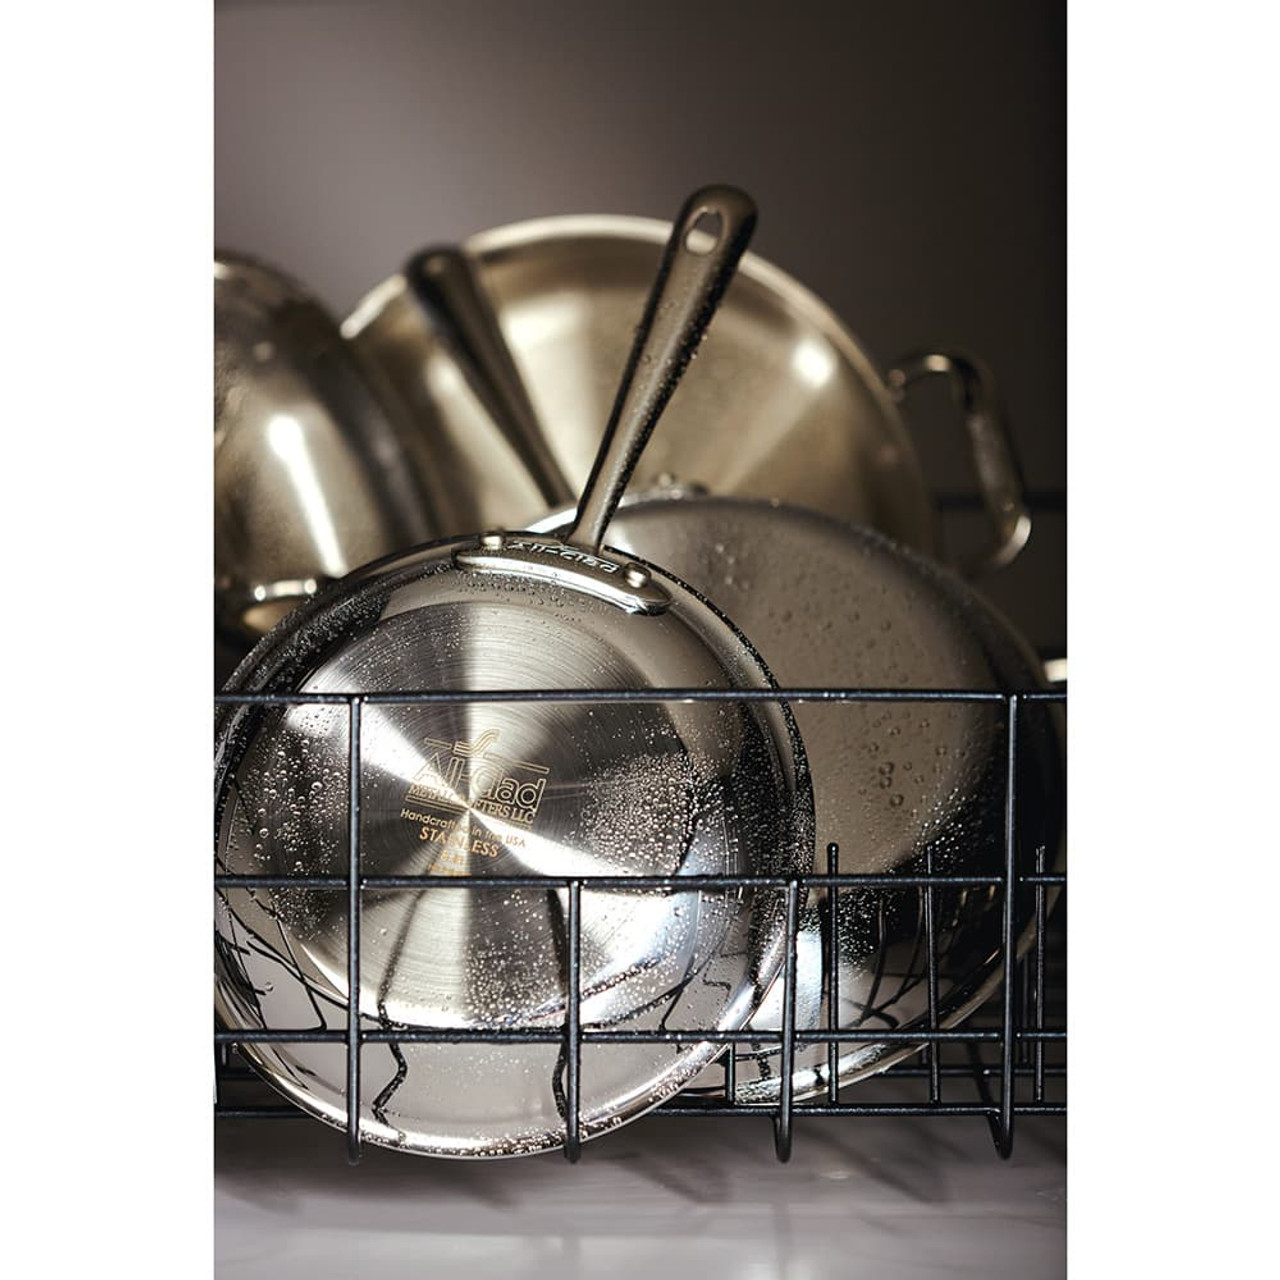 https://cdn11.bigcommerce.com/s-hccytny0od/images/stencil/1280x1280/products/483/8425/all-clad-stainless-steel-fry-pan__82214.1555828411.jpg?c=2?imbypass=on